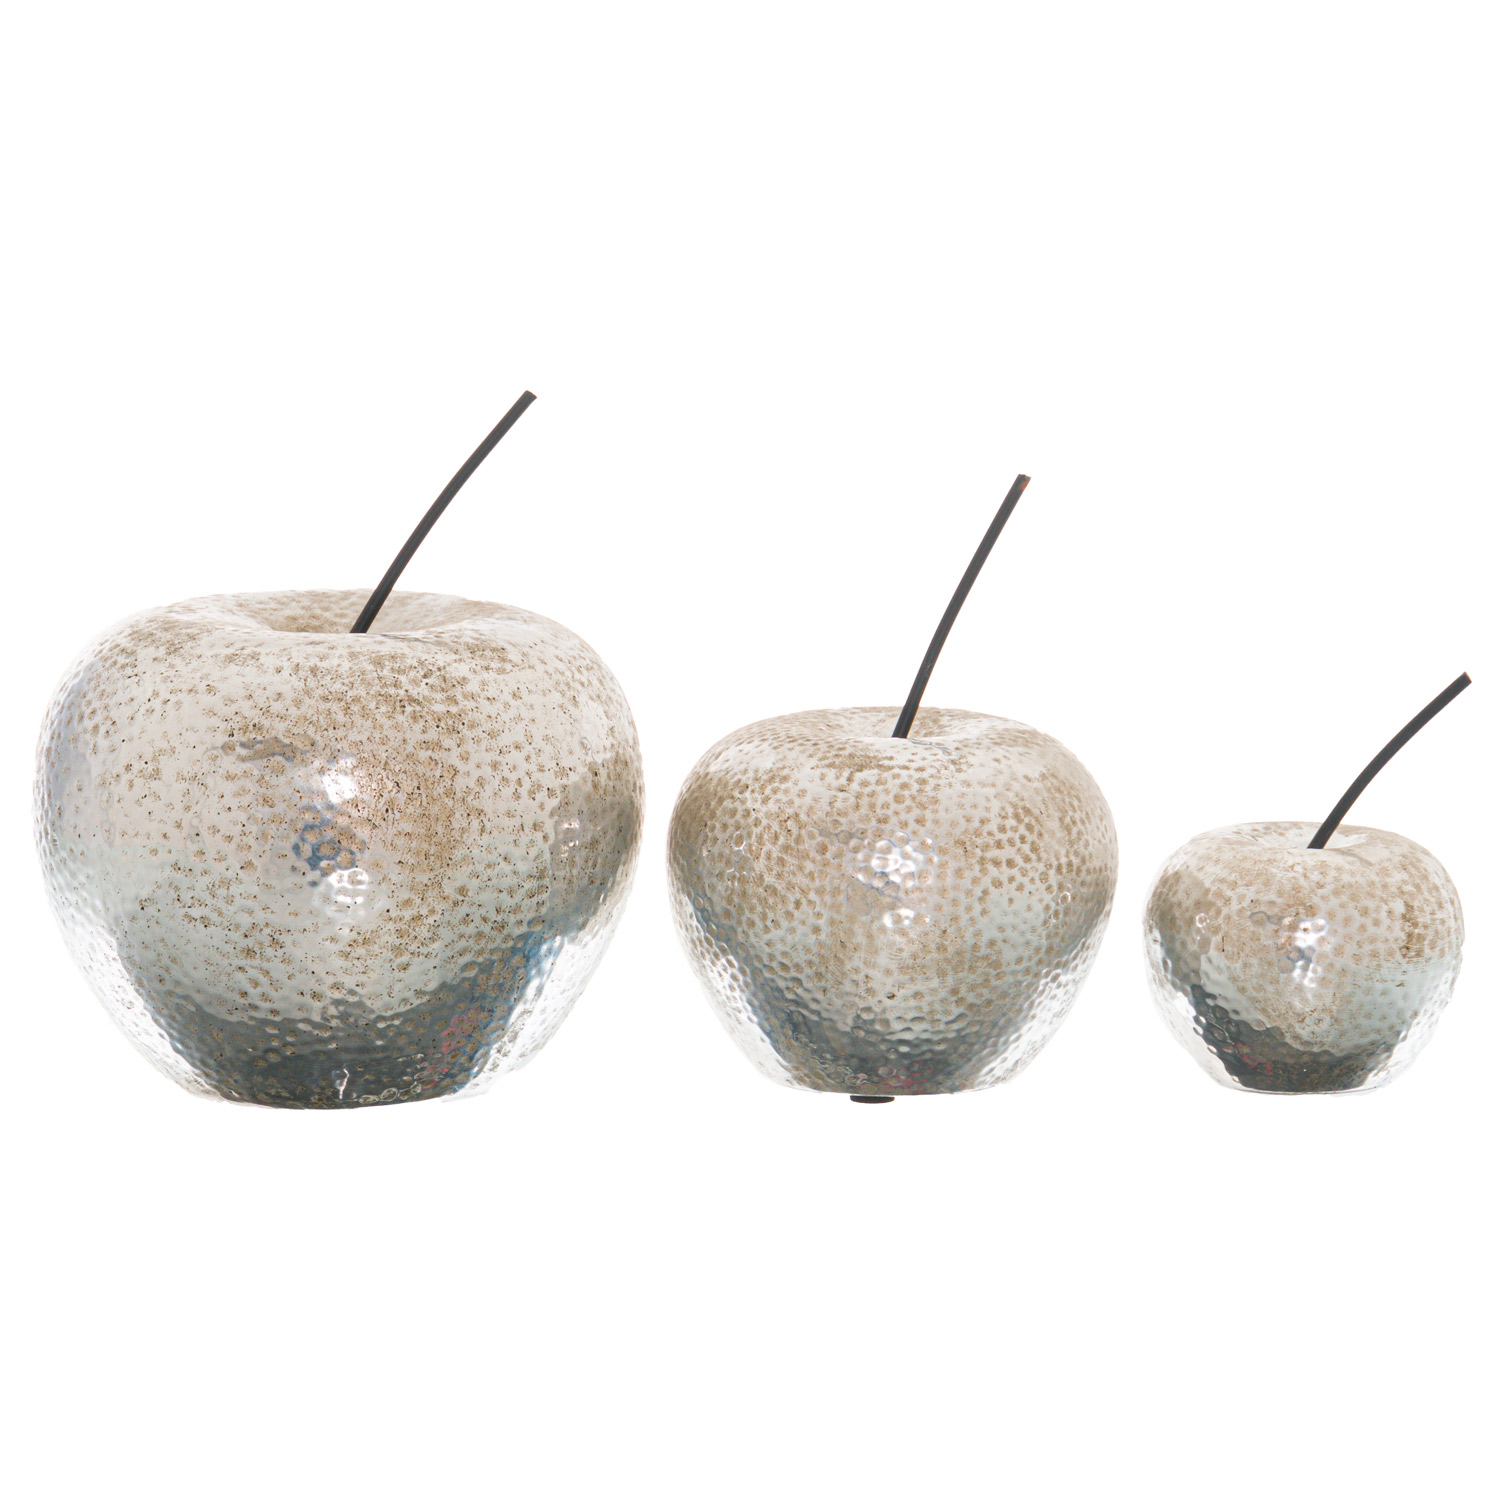 Large Silver Apple Ornament - Image 2